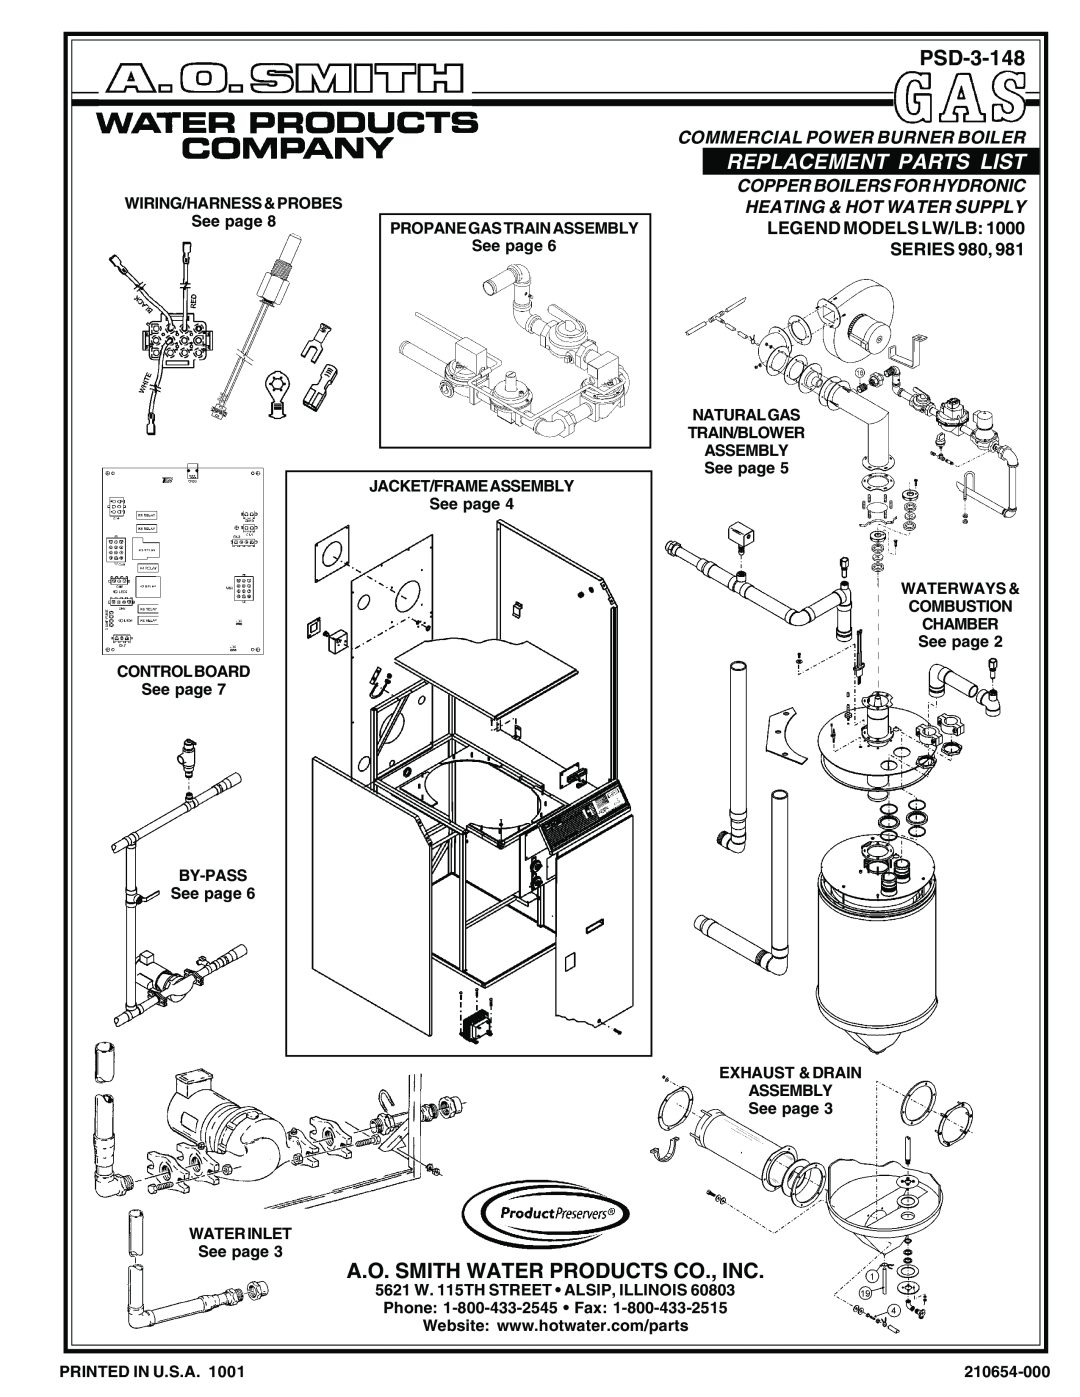 A.O. Smith 980 Series, 981 Series manual PSD-3-148, Replacement Parts List, A.O. Smith Water Products Co., Inc 